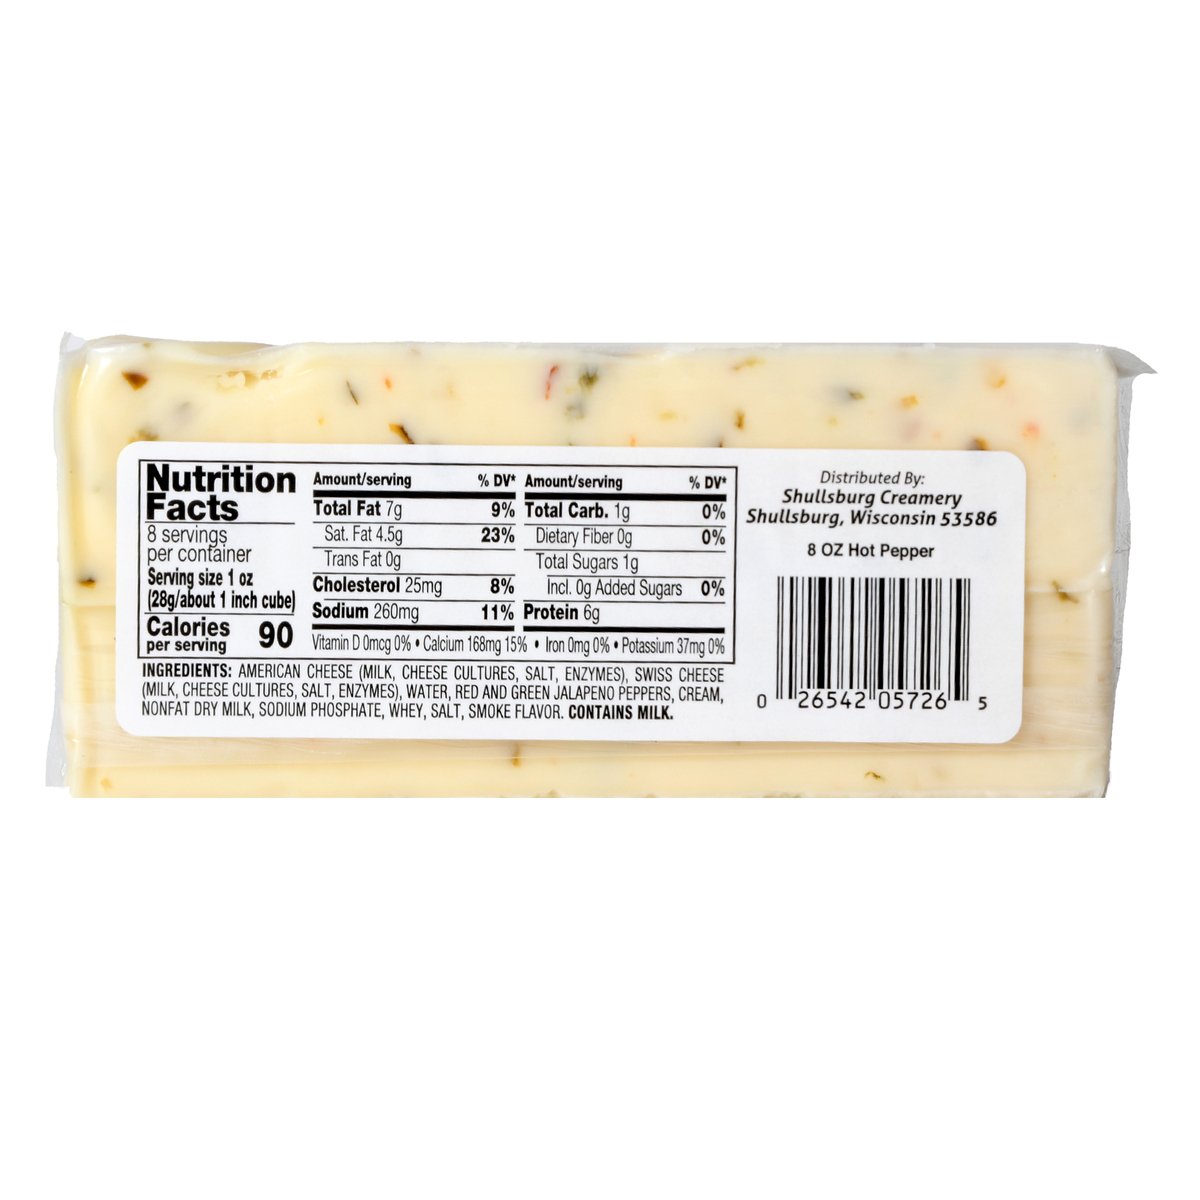 Shullsburg Creamery Hot Pepper Pasteurized Process Cheese With Jalapeno Pepper 227 g